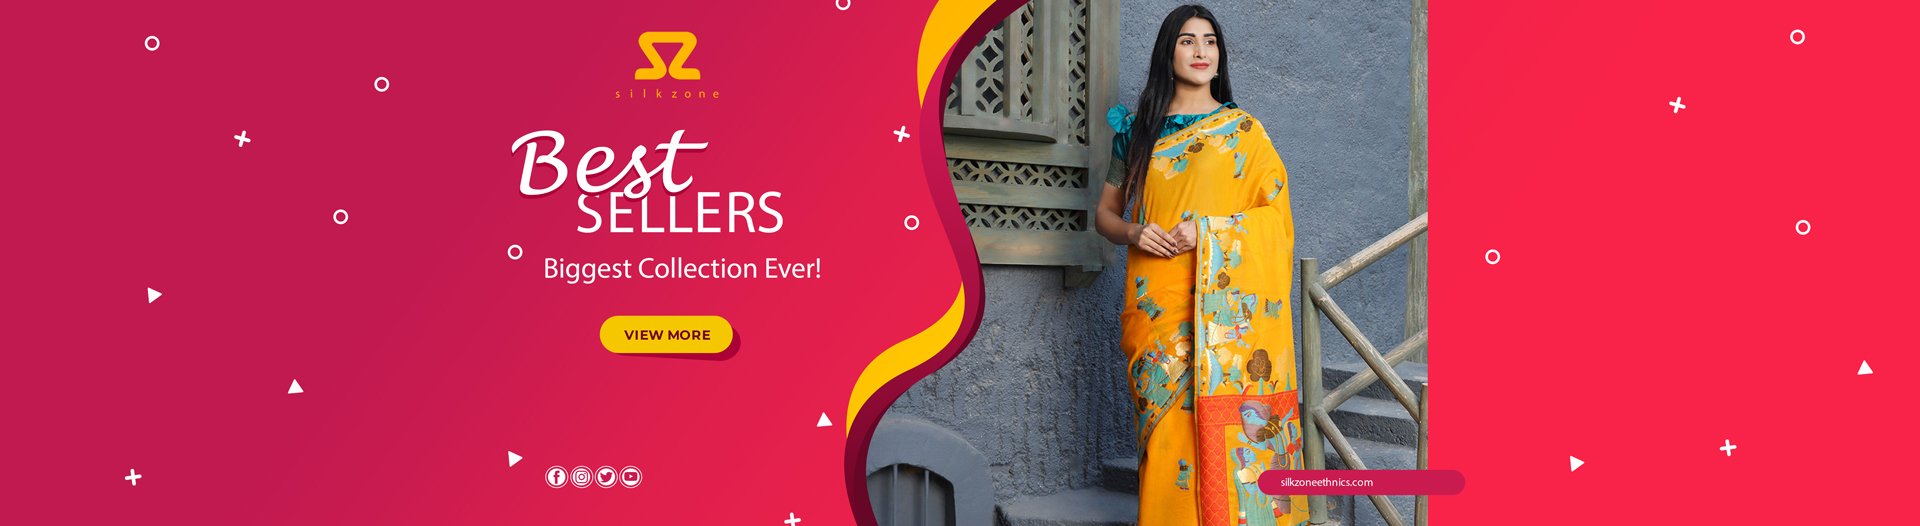 https://silkzoneethnics.com/product-category/sarees/saree-collection/best-sellers/